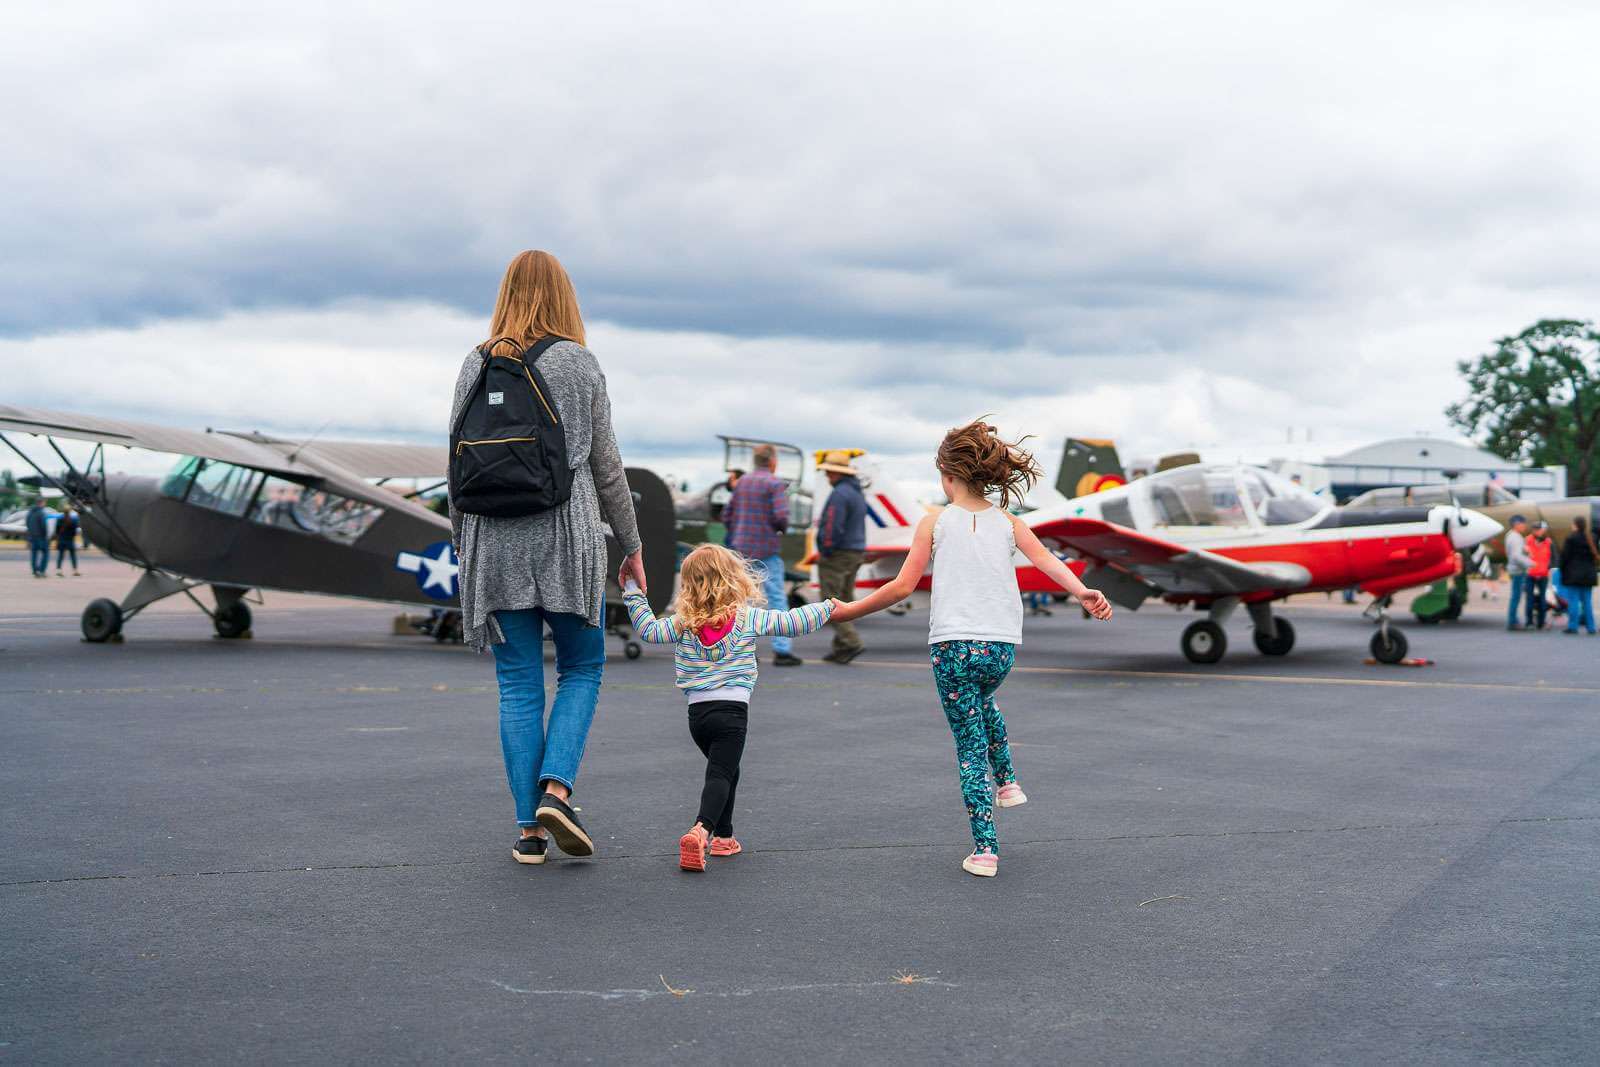 A woman and two young girls view airplanes at the Olympic Airshow in Tumwater, Washington